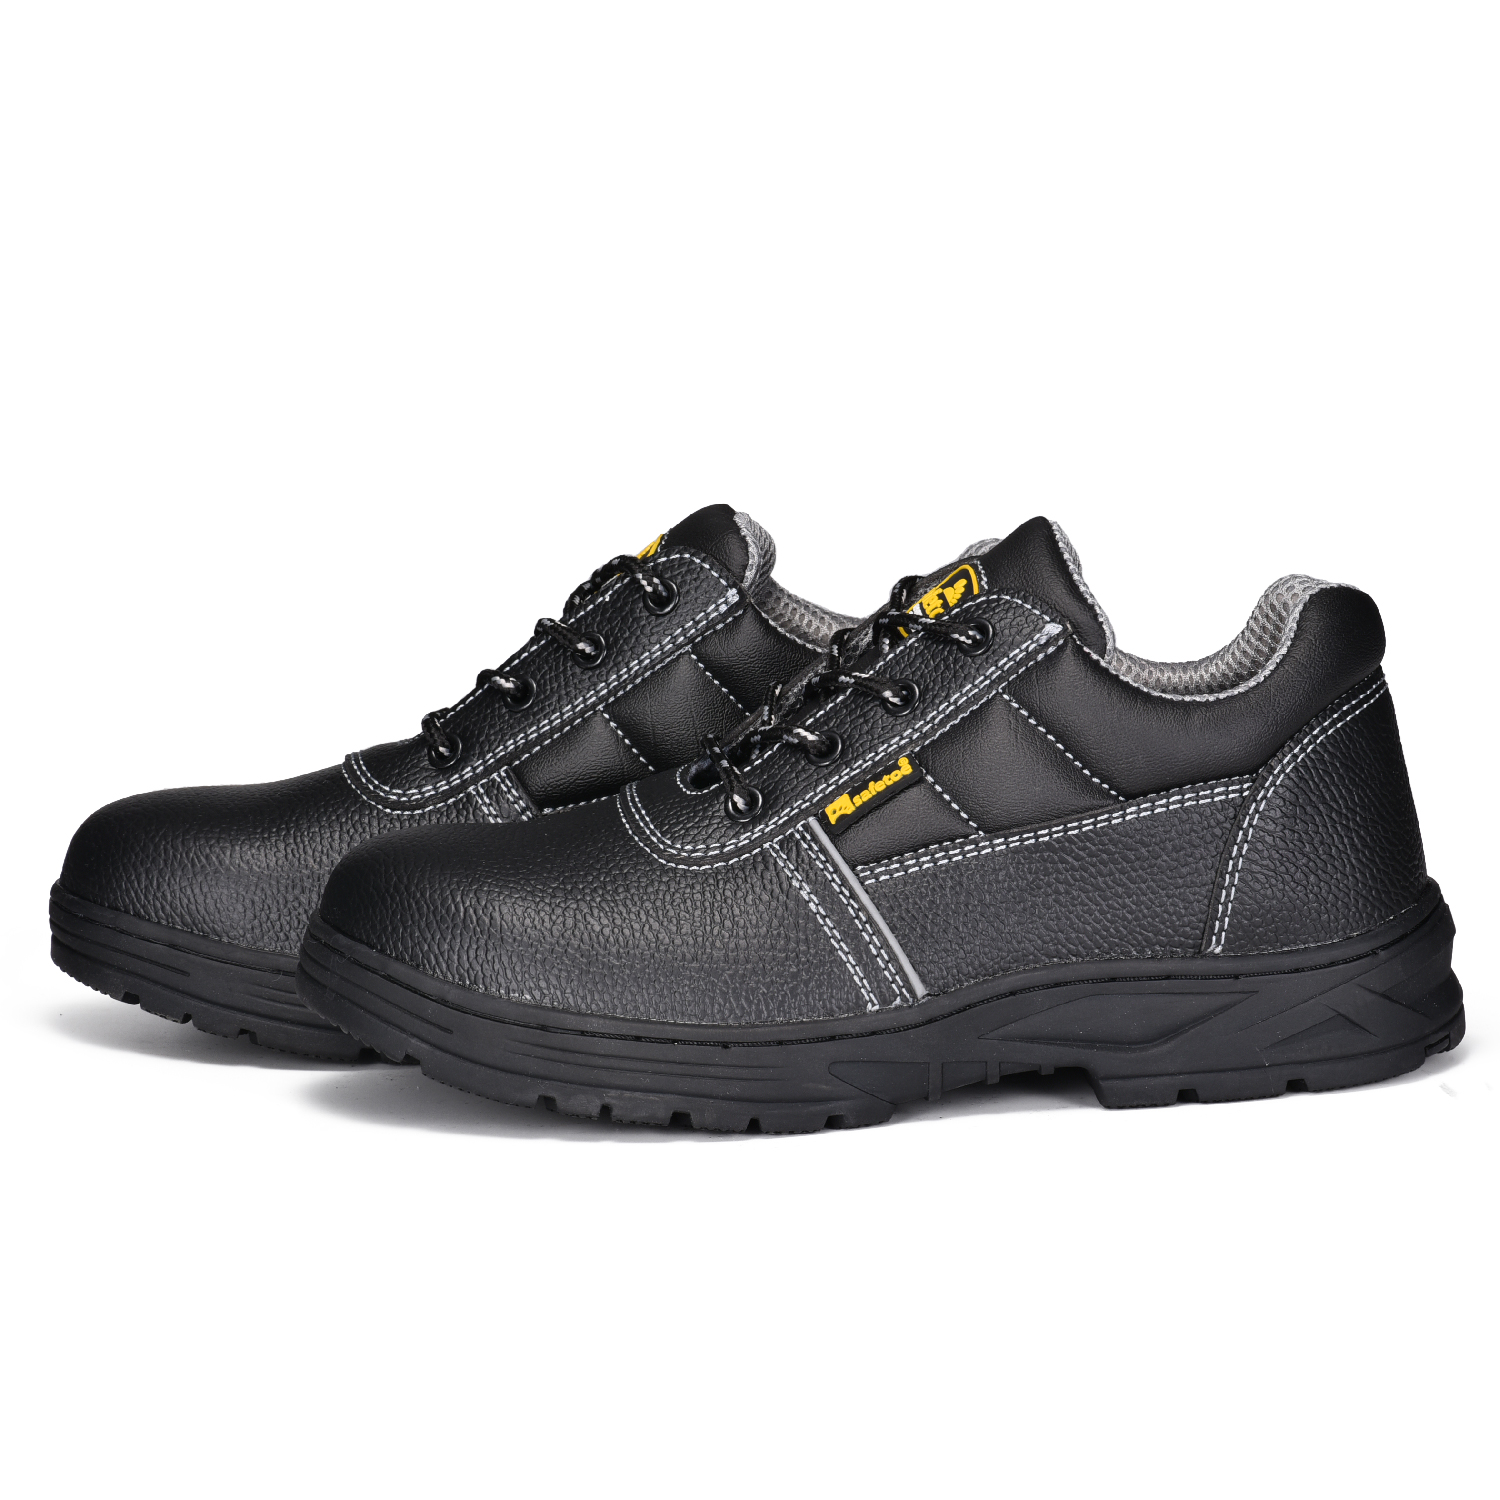 Mining Steel Toe Safety Work Shoes L-7006RB